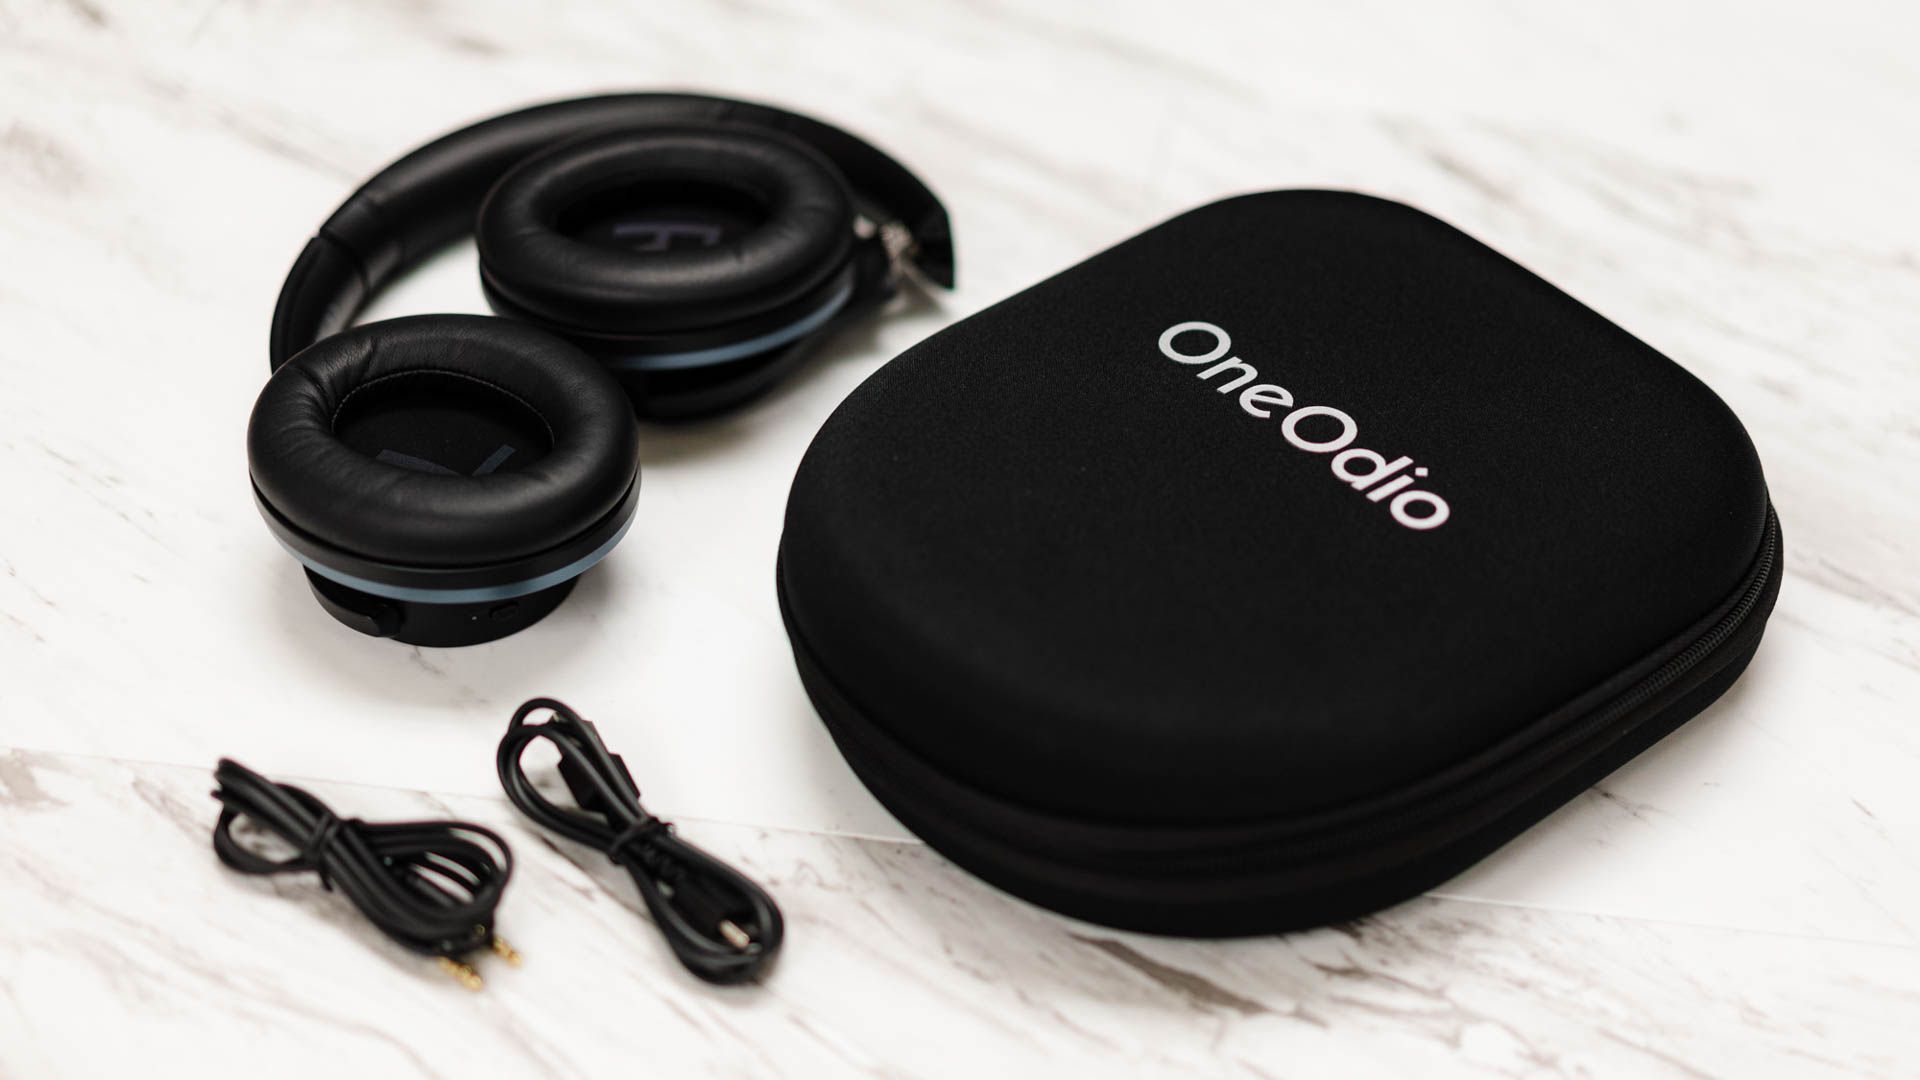 OneOdio A10 Hybrid Active Noise Cancelling Headphones with their case